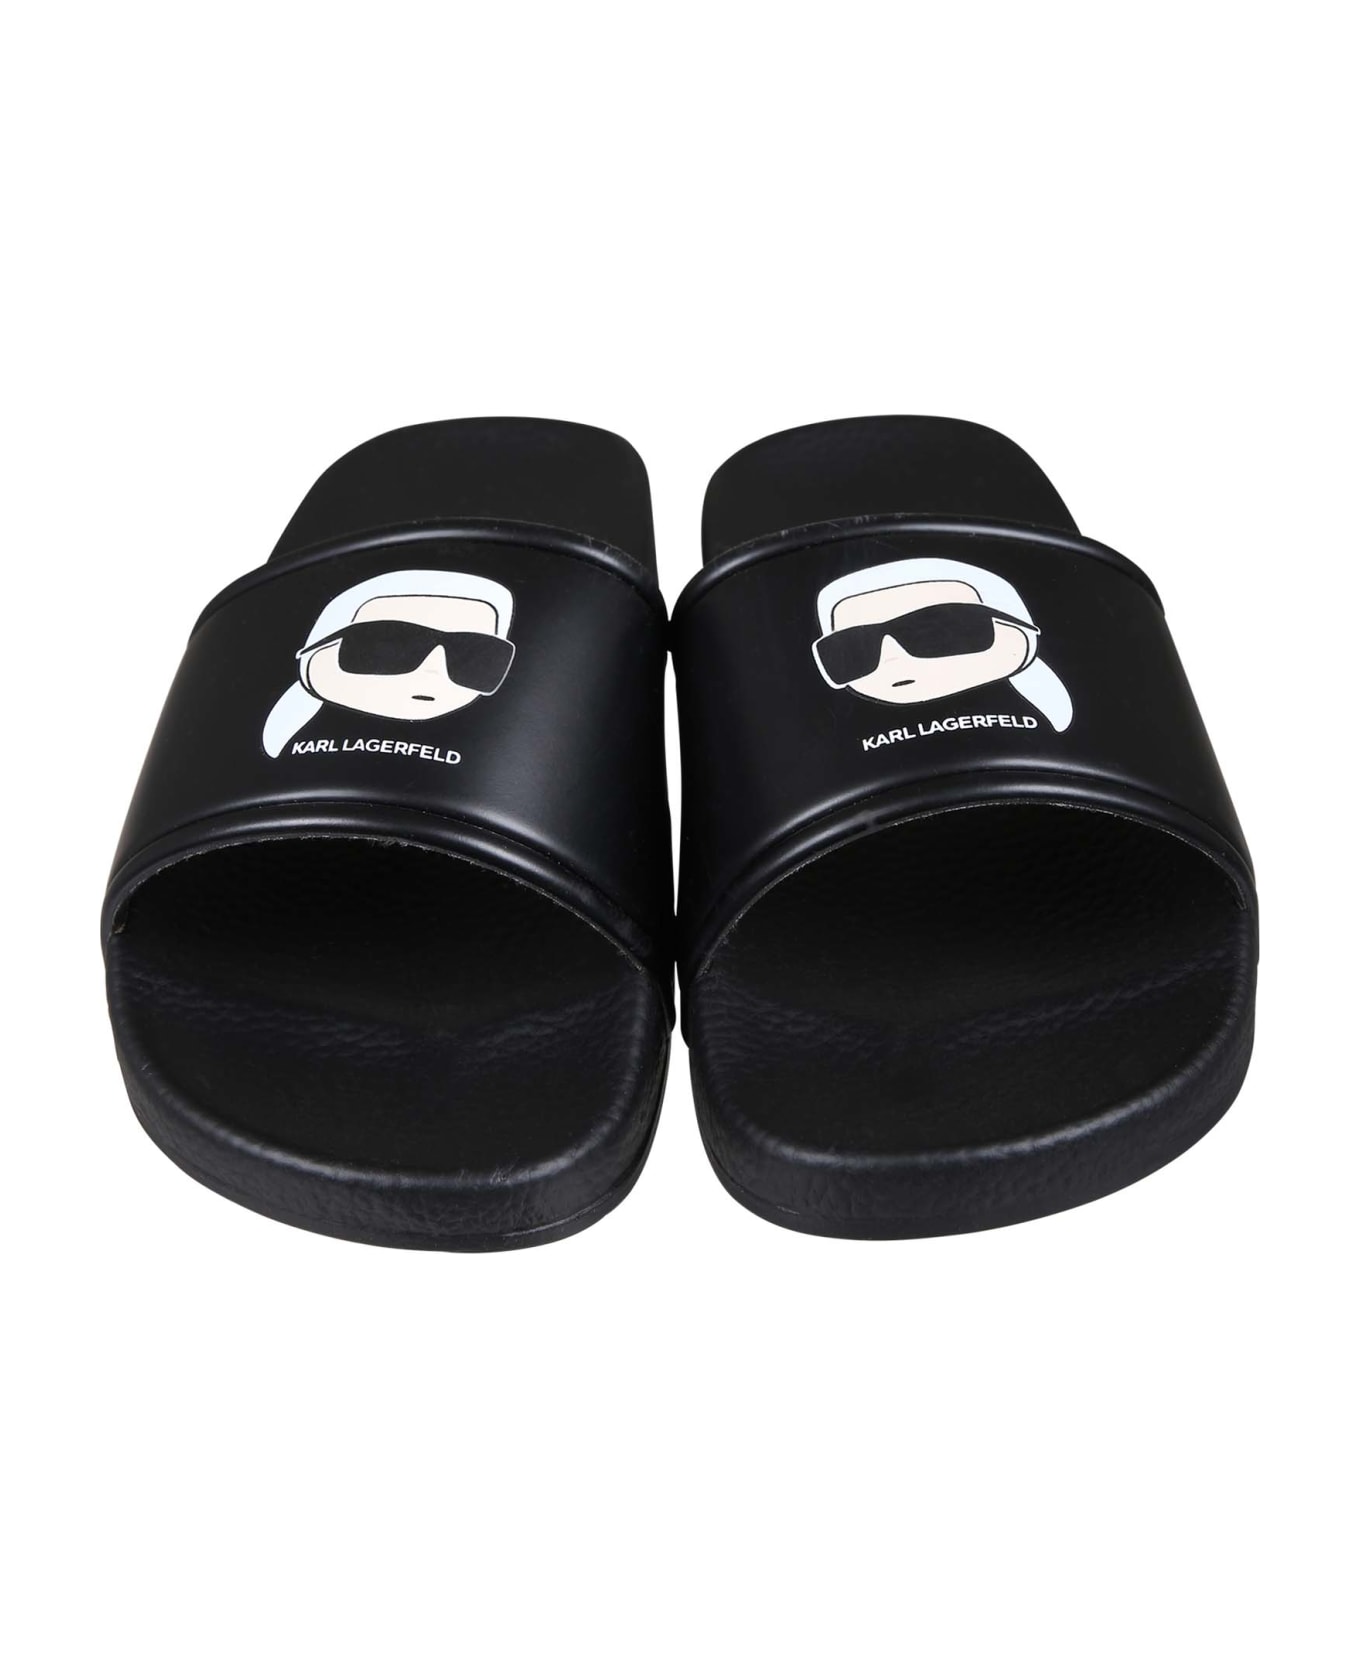 Karl Lagerfeld Kids Black Slippers For Boy With Logo And Karl - Black